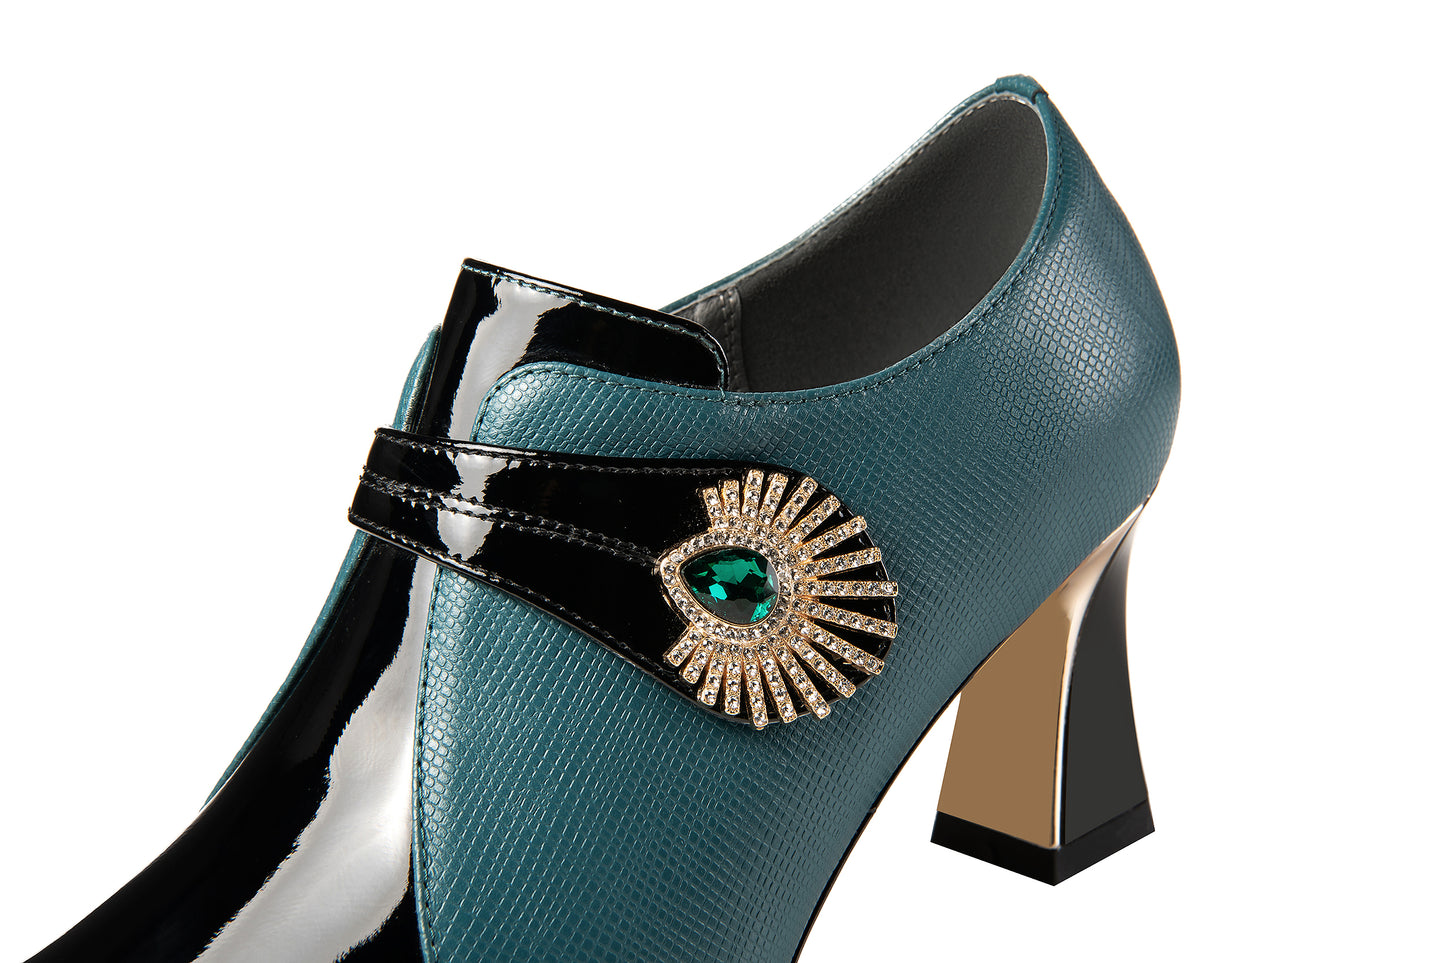 TinaCus Women's Patent and Genuine Leather Handmade Pointed Toe Spool Heel Green Crystal Side Zip Oxford Pumps